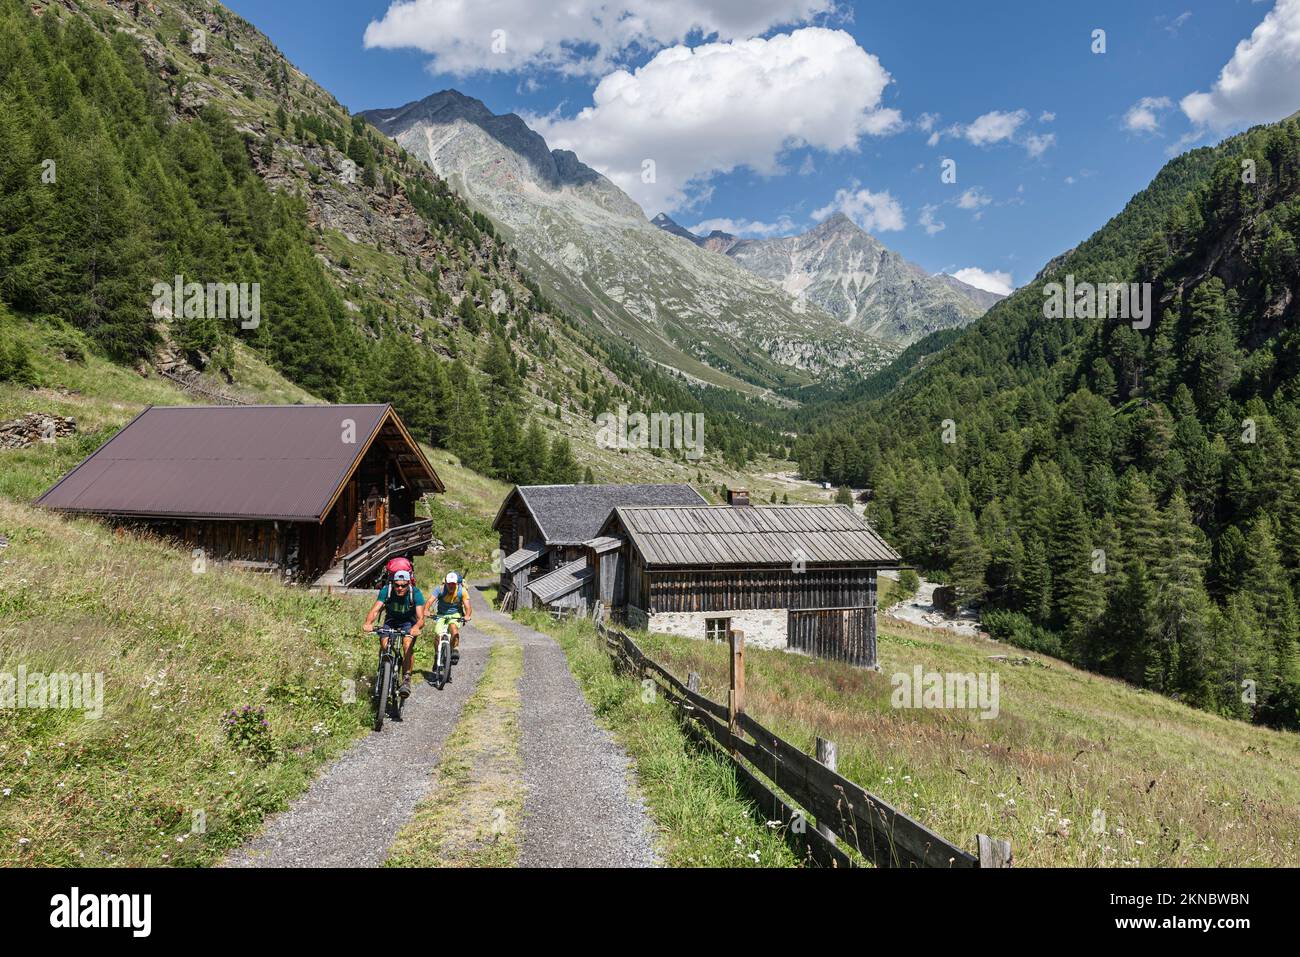 Mountain bikers in front of rustic alpine huts, mountain forests and peaks in the Windach valley, Ötztal Alps, Austria Stock Photo